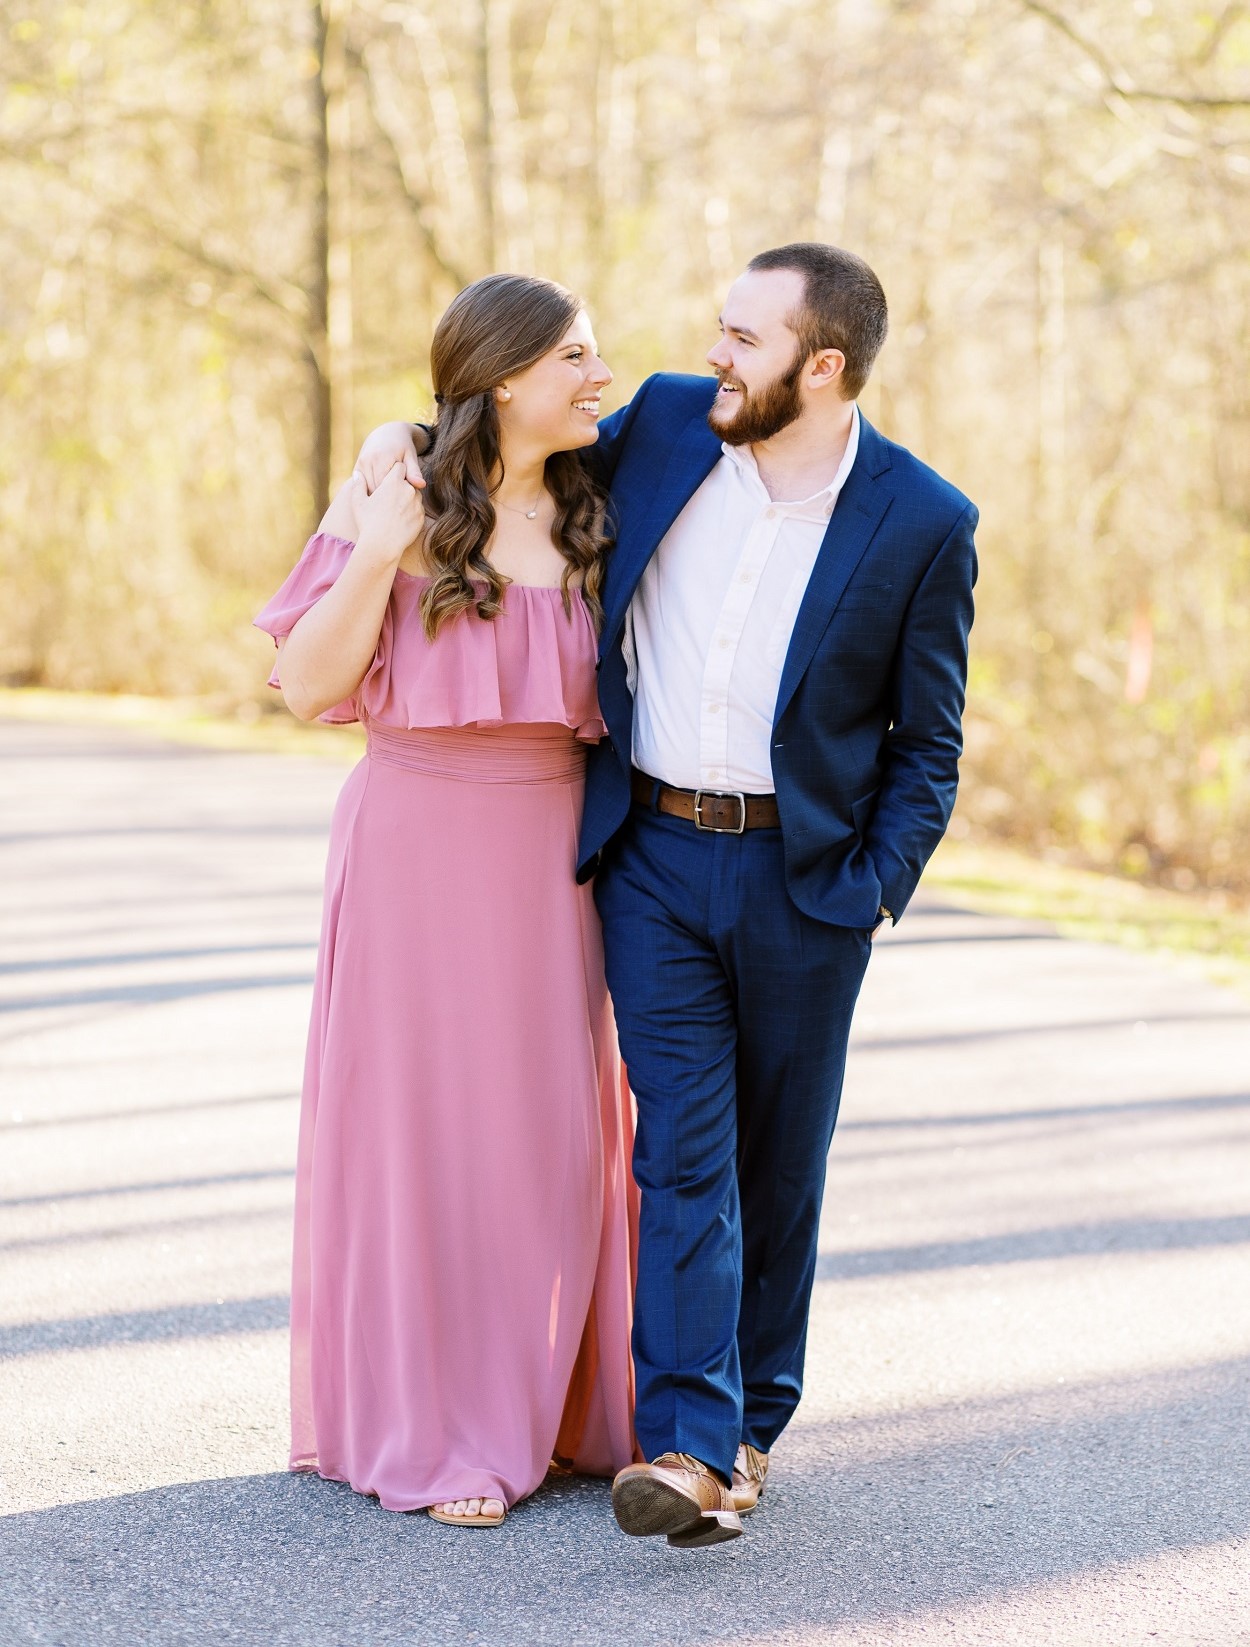 Spring Engagement Photo Outfits with pink dress and blue suit